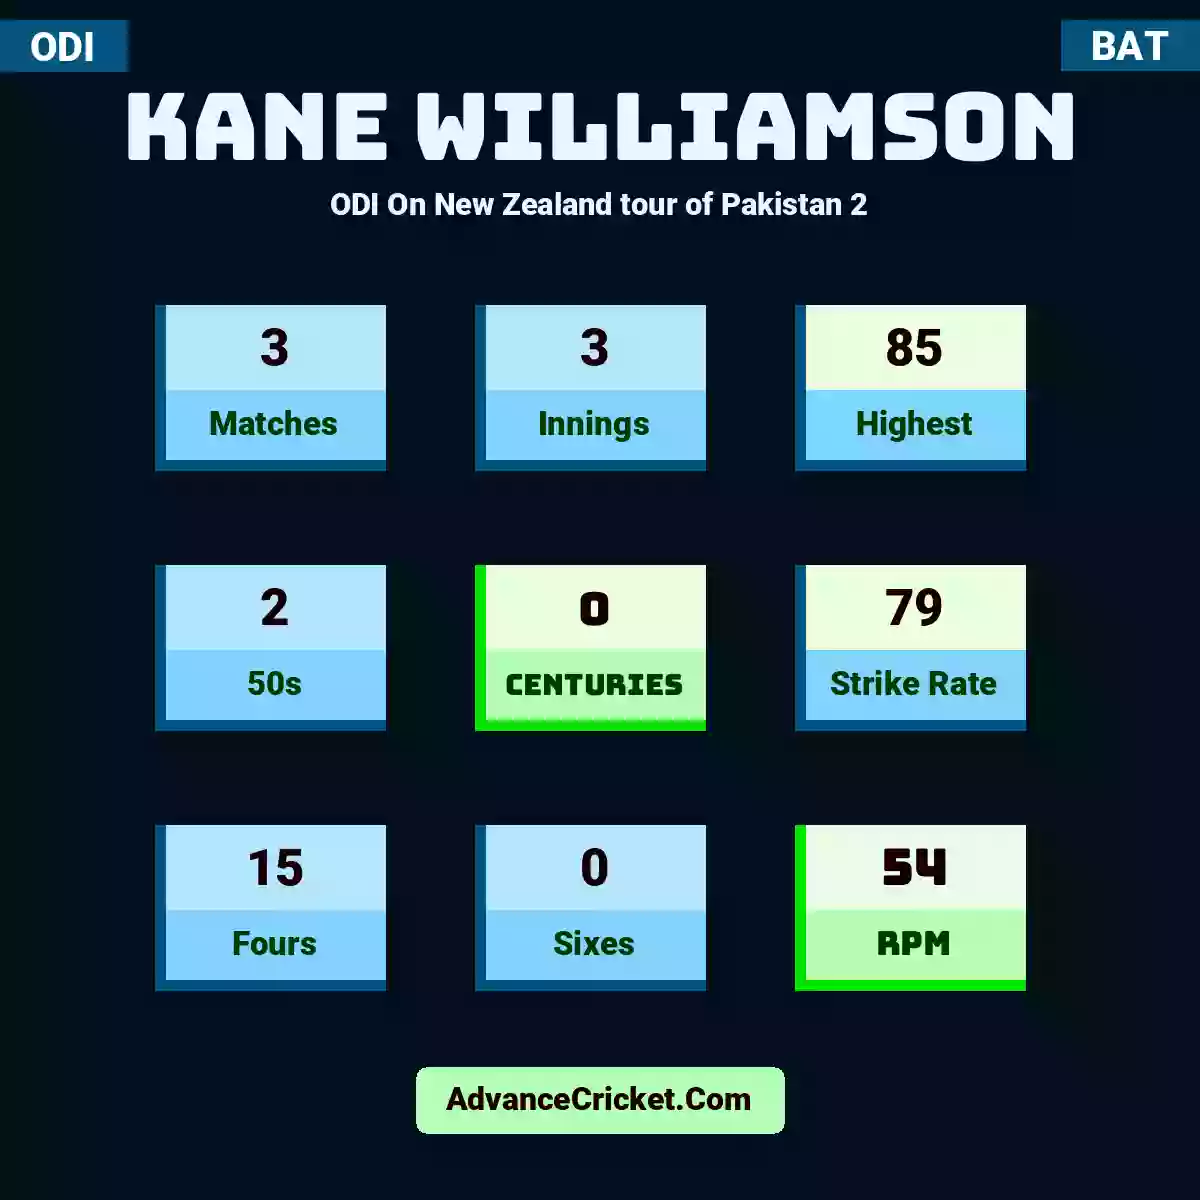 Kane Williamson ODI  On New Zealand tour of Pakistan 2, Kane Williamson played 3 matches, scored 85 runs as highest, 2 half-centuries, and 0 centuries, with a strike rate of 79. K.Williamson hit 15 fours and 0 sixes, with an RPM of 54.